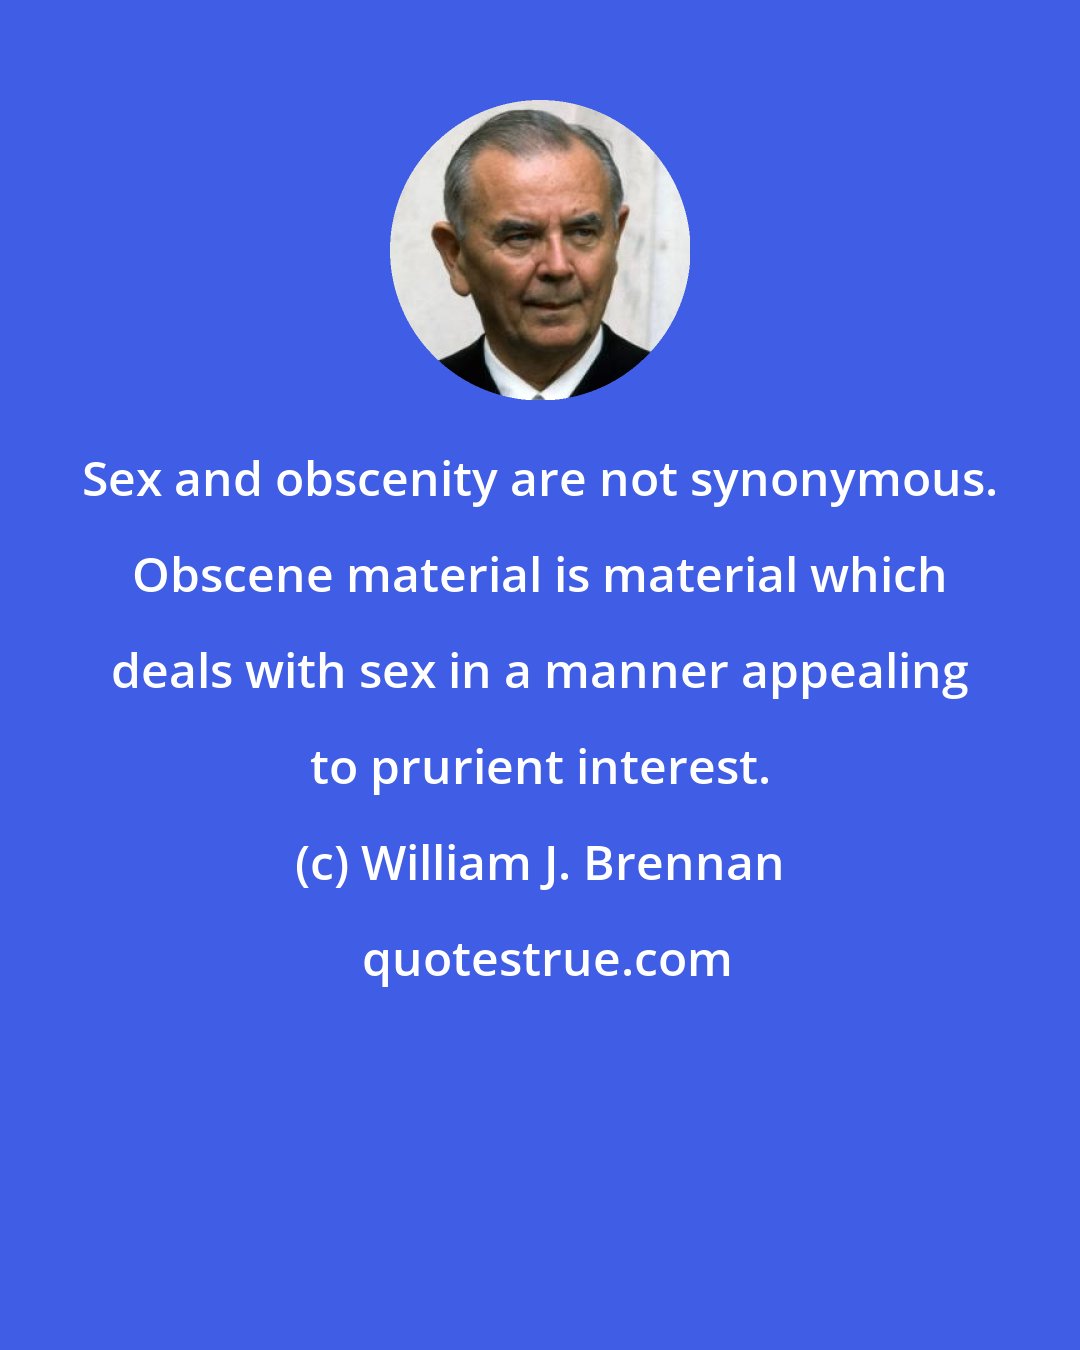 William J. Brennan: Sex and obscenity are not synonymous. Obscene material is material which deals with sex in a manner appealing to prurient interest.